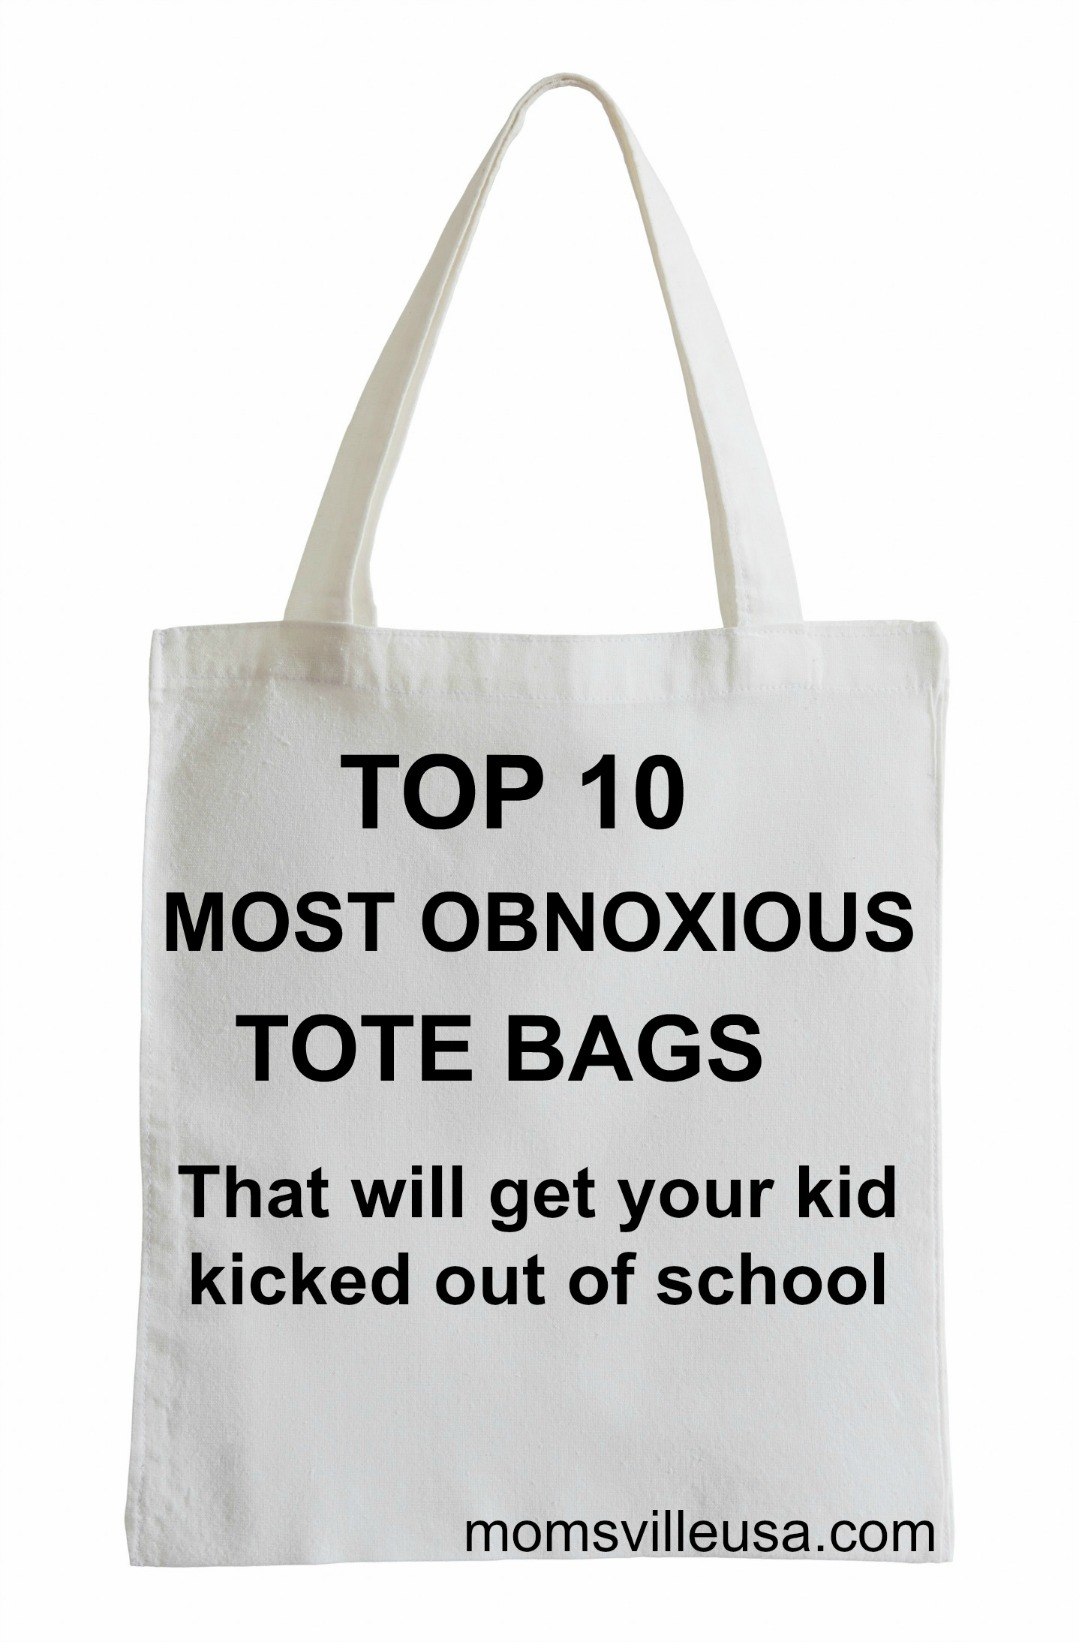 Top 10 Most Obnoxious Tote bags